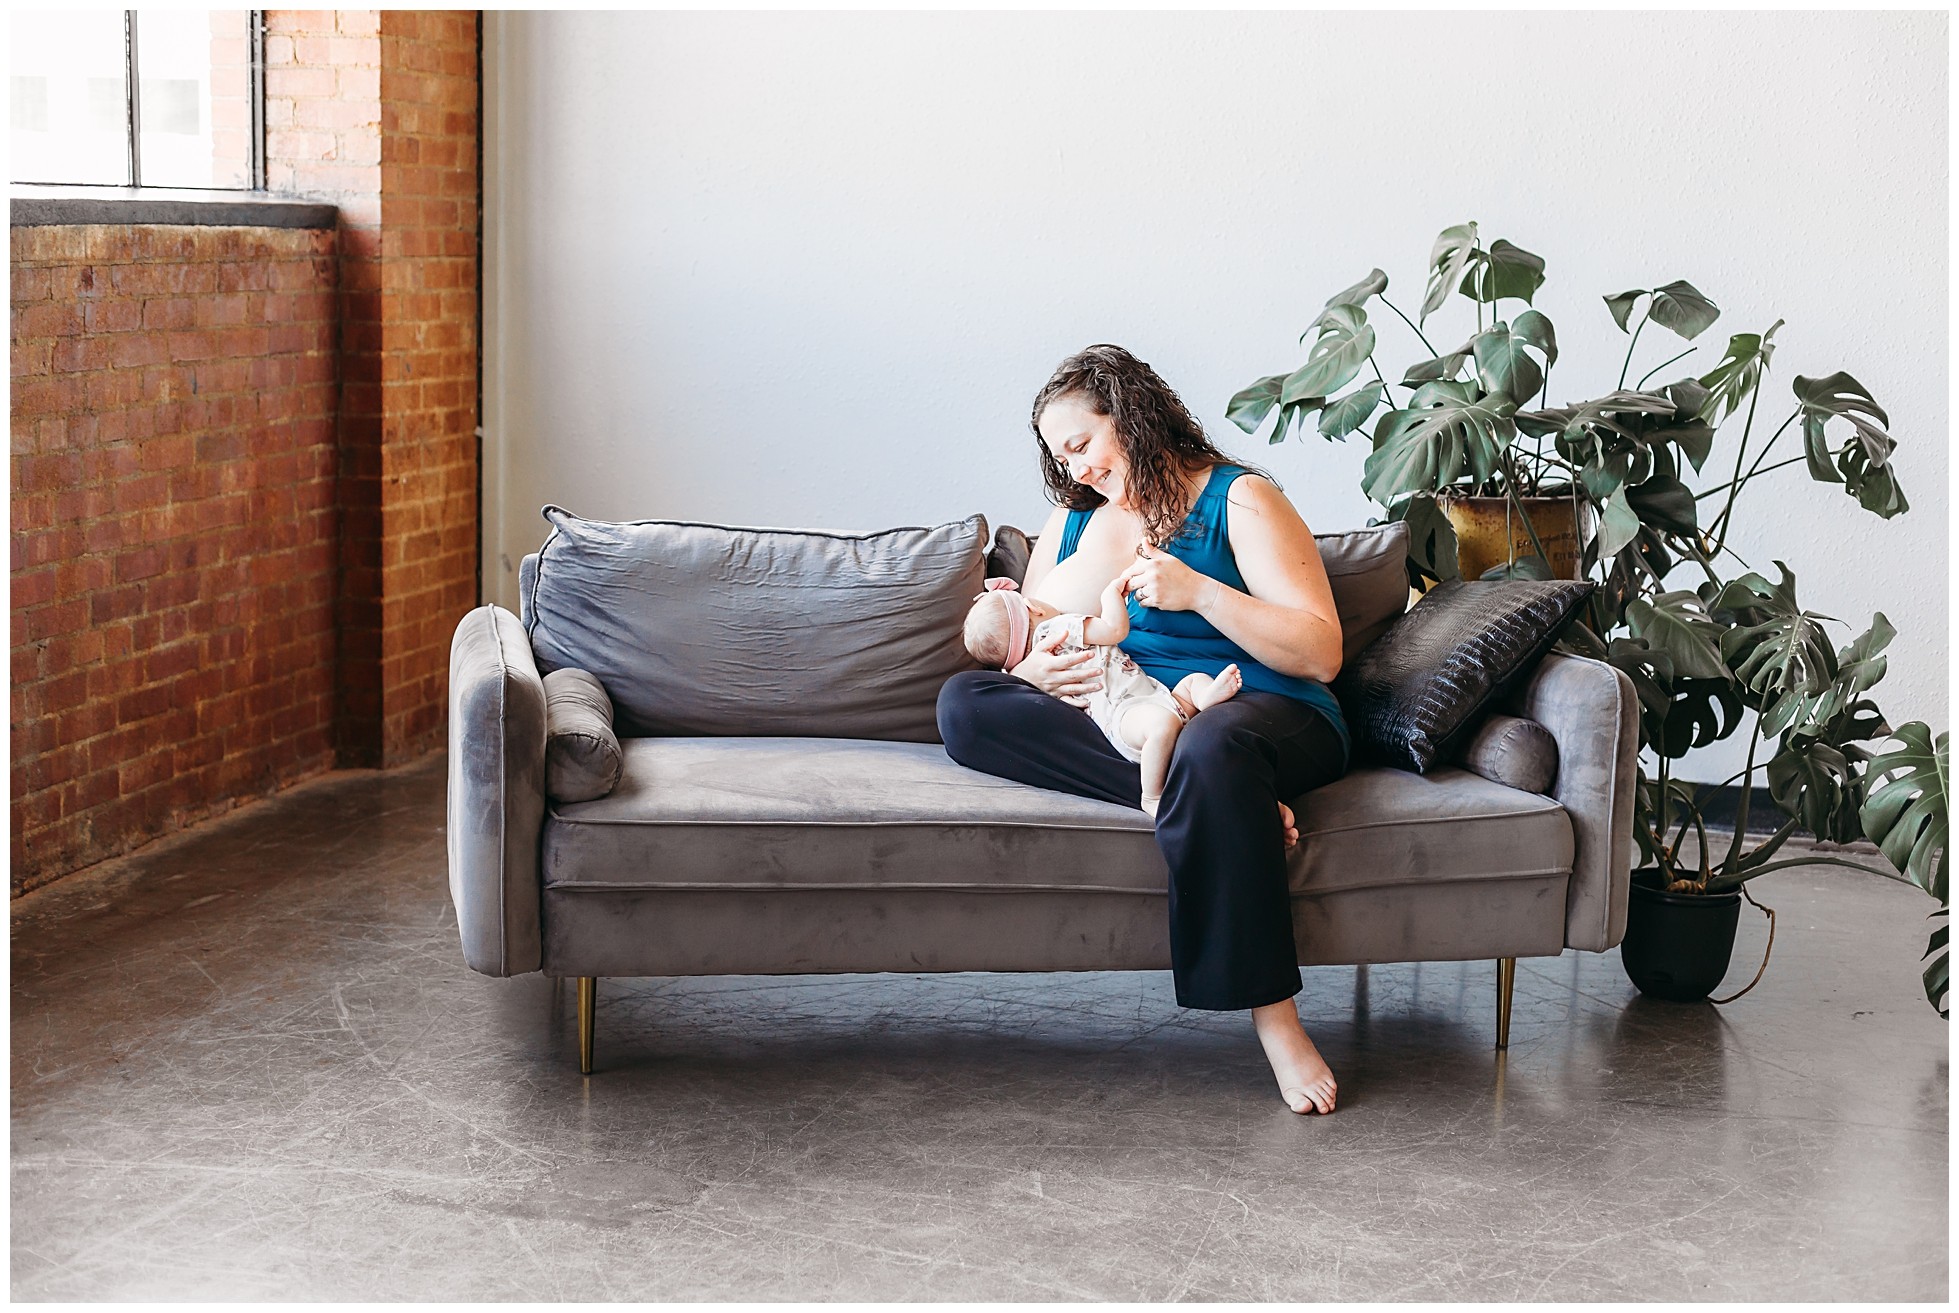 Mother nurses child on couch during OKC motherhood photo session.